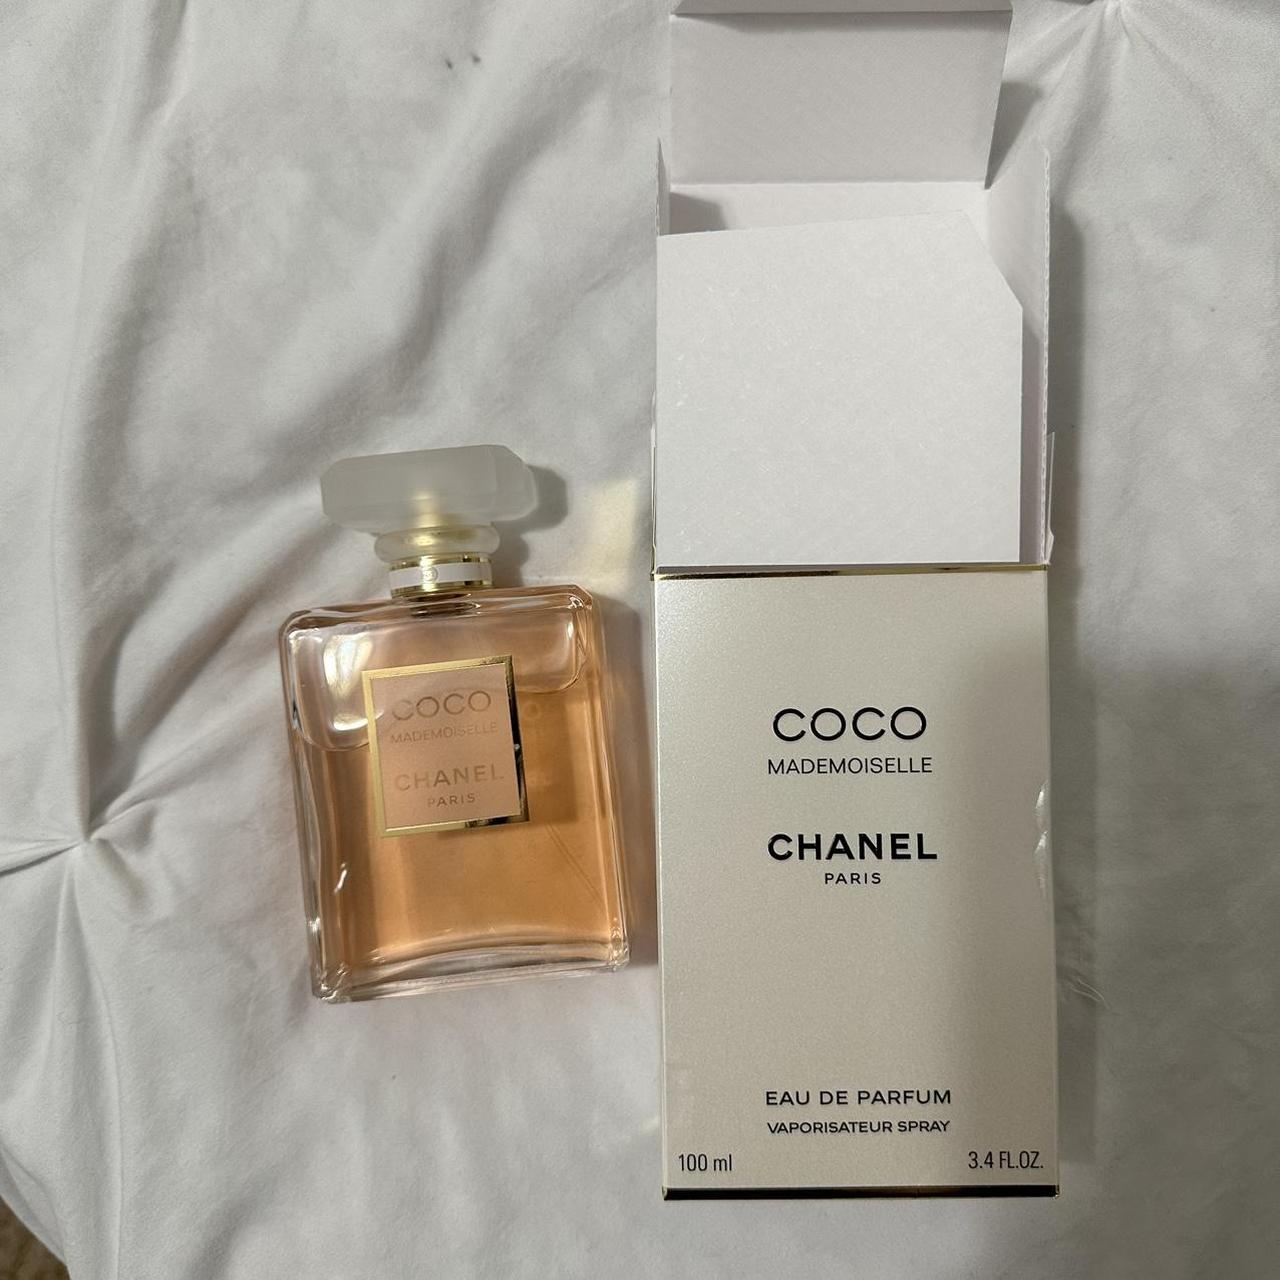 New Chanel Mademoiselle Perfume, 3.4floz, It was a